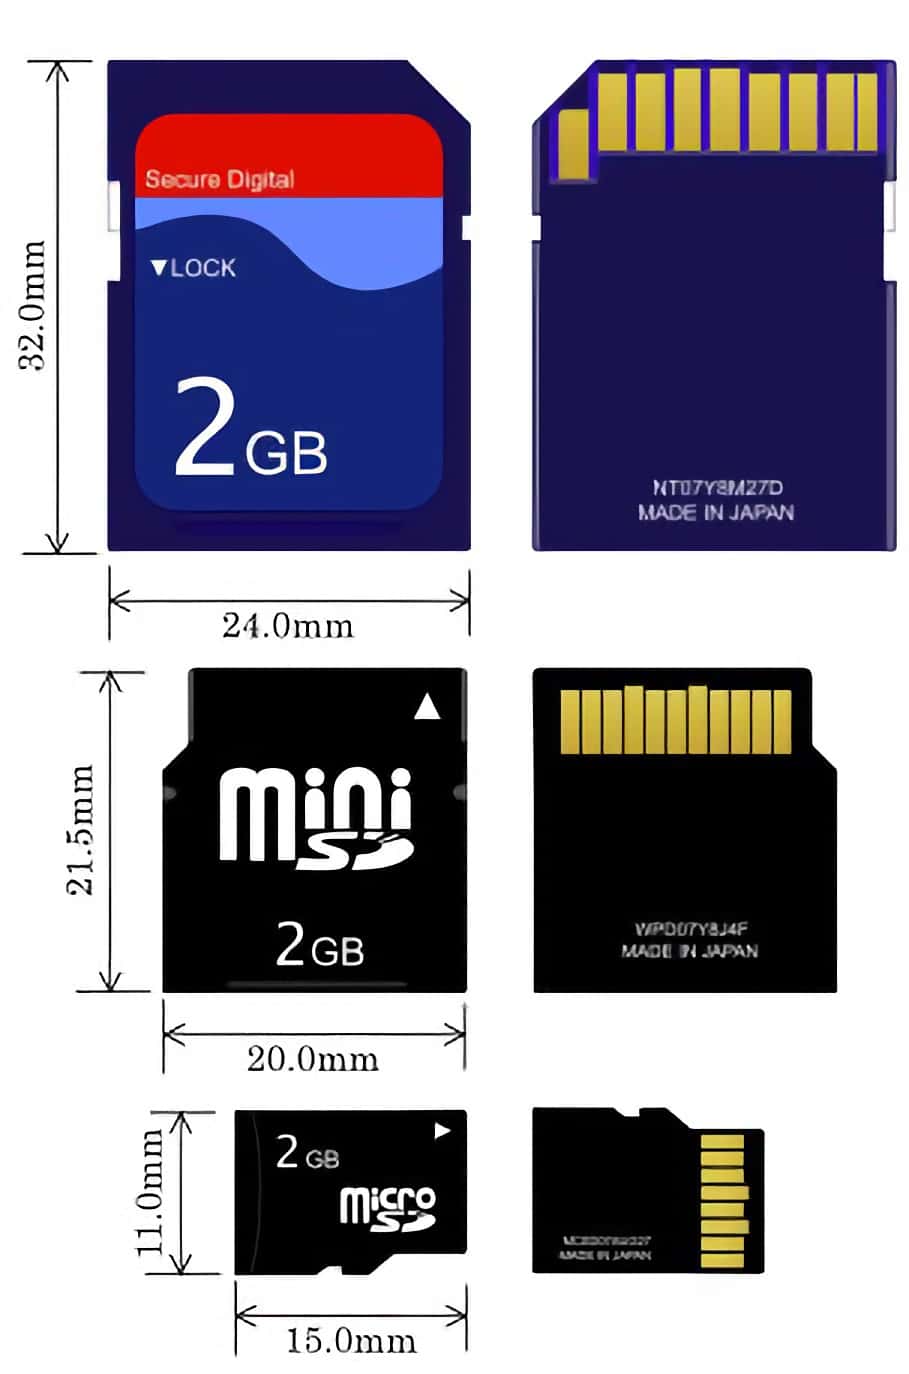 microSD card sizes compared to other SD types. Source.